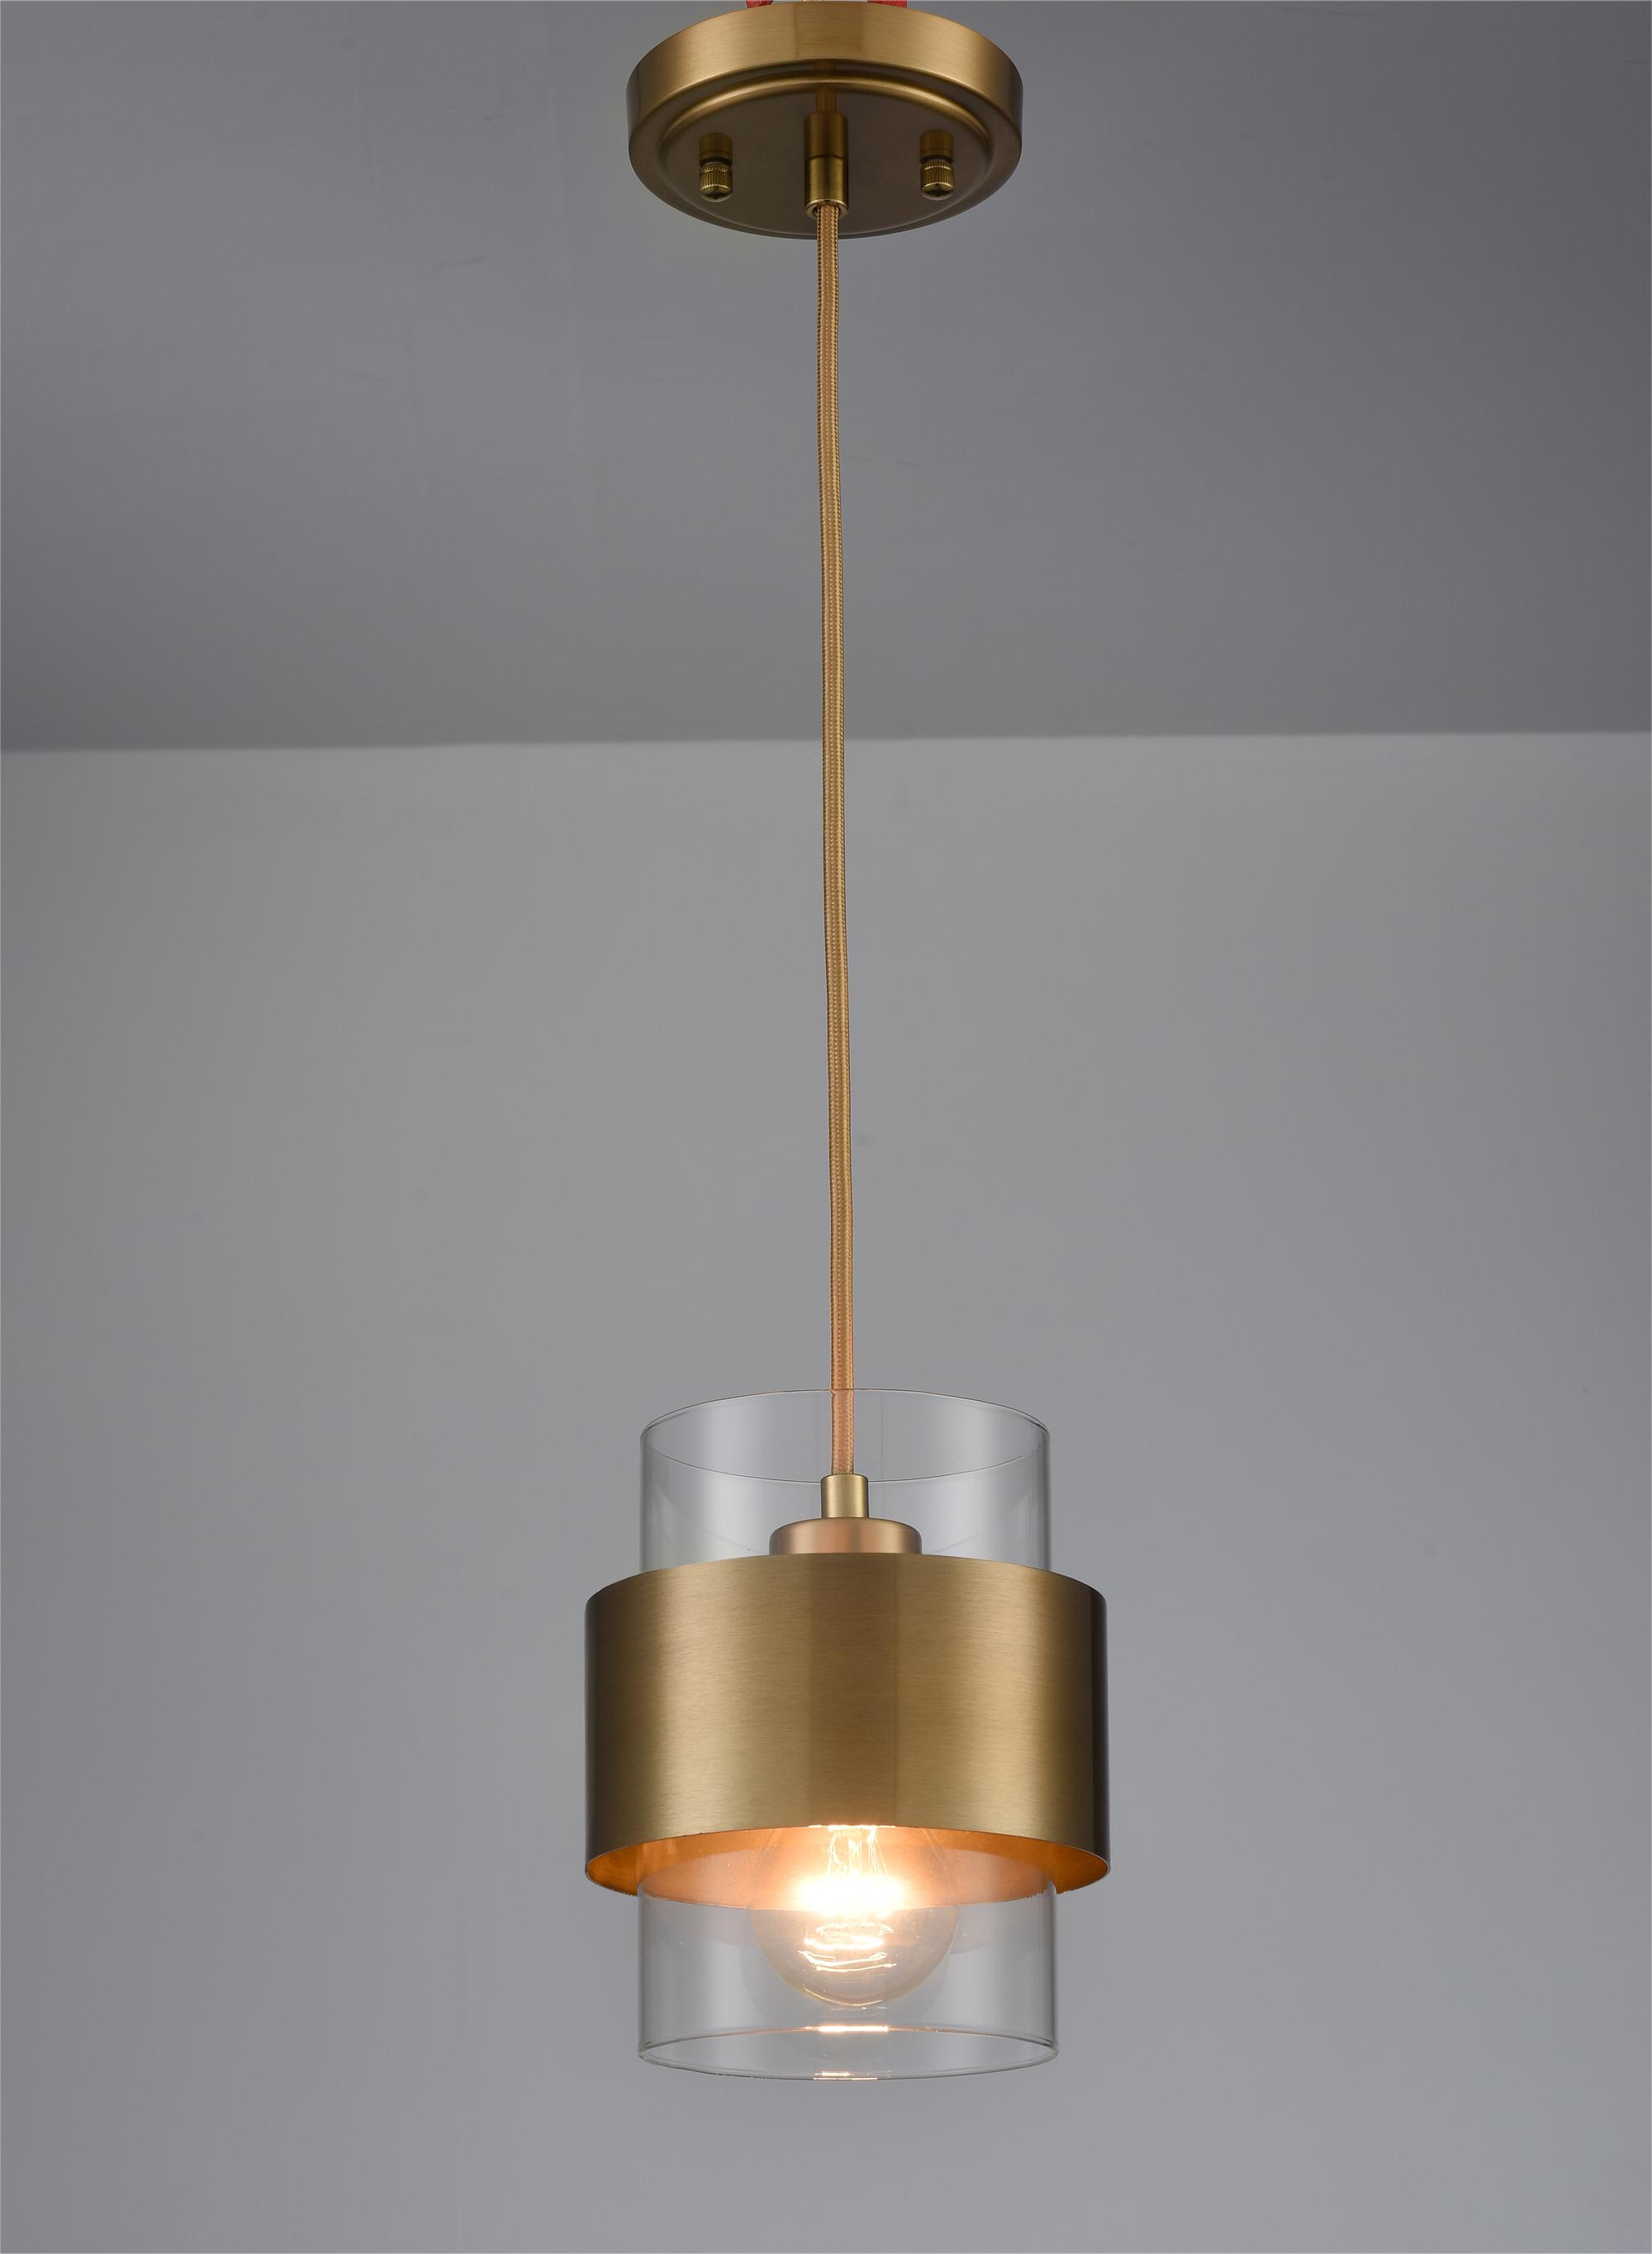 Modern Pendant Light Fixtures Over Kitchen Island Lighting Ceiling Hanging Farmhouse Metal Industrial Mini Cylinder Pendant Lighting Clear Glass Shade